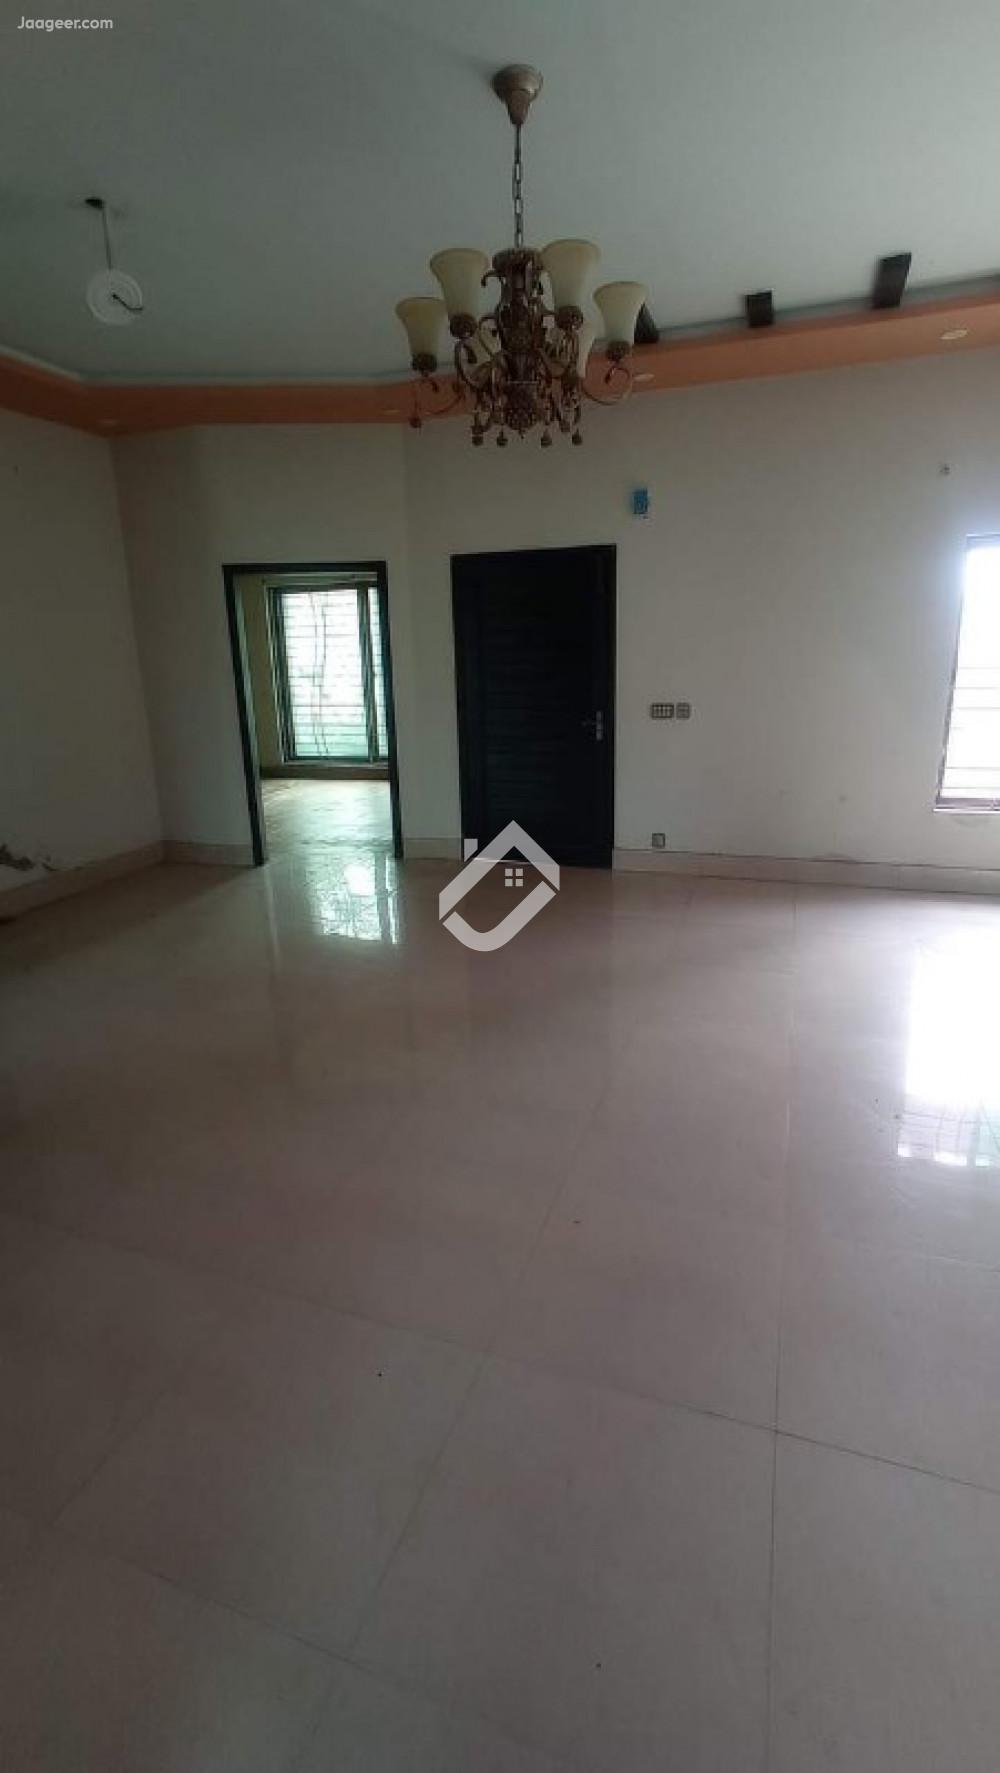 Main image 9 Marla Double Storey House For Sale In Al-Hamra Town Al-Hamra Town, Lahore